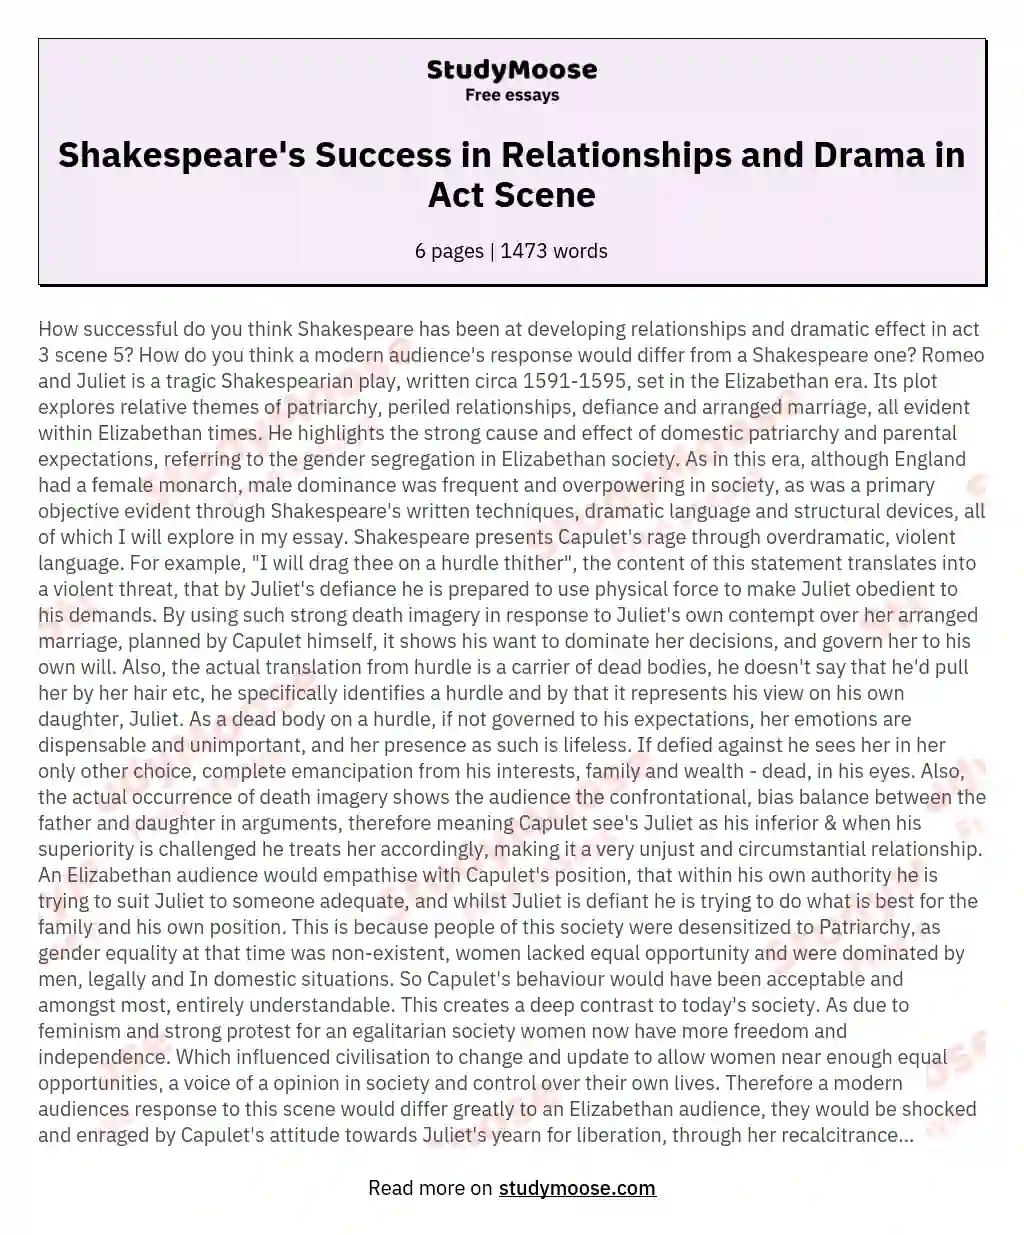 Shakespeare's Success in Relationships and Drama in Act  Scene essay